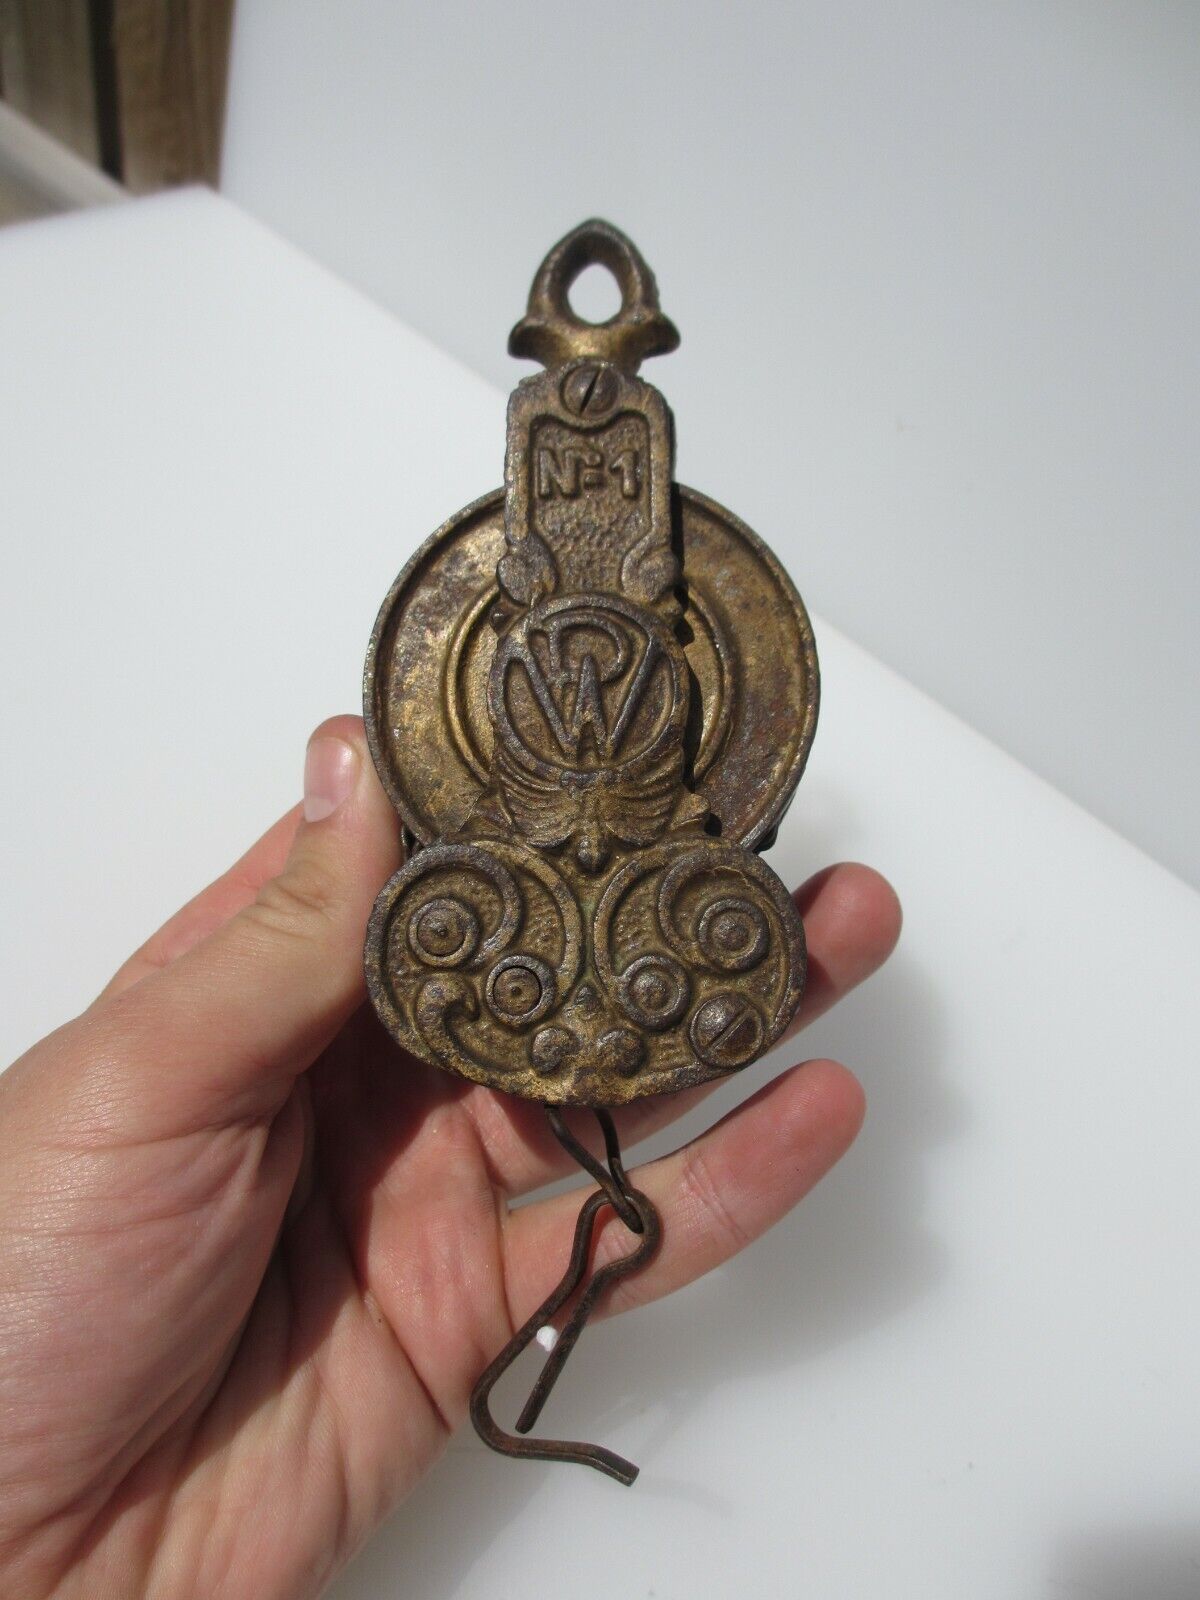 Antique Iron Pulley Block and Tackle French Ornate Cast Gilt Lea